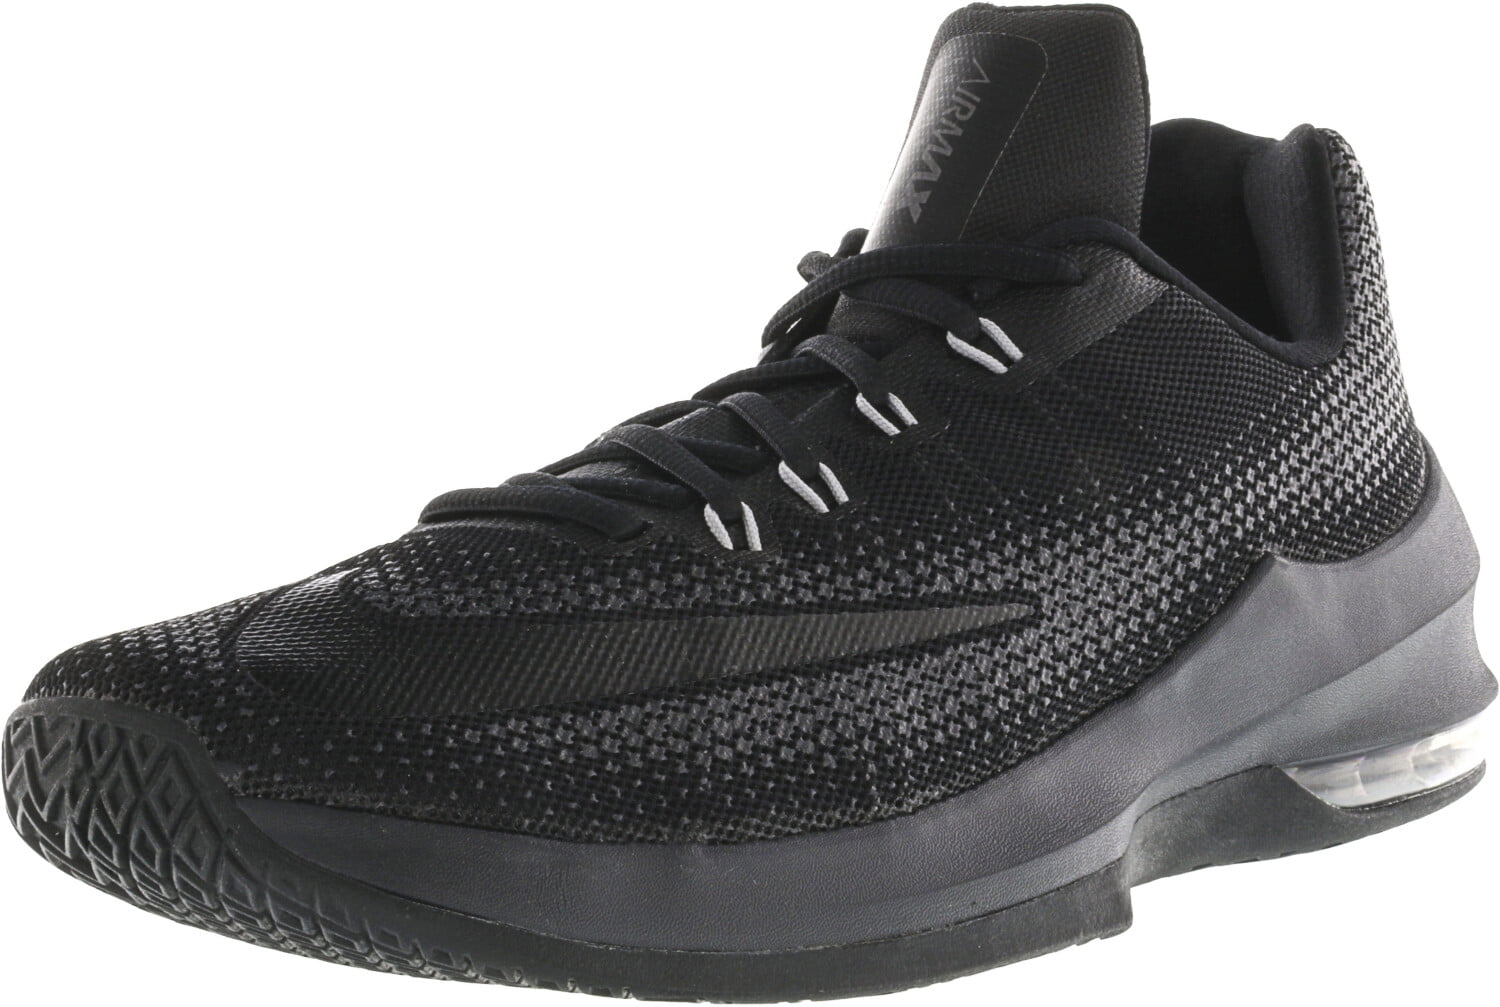 Black-Anthracite Ankle-High Basketball 